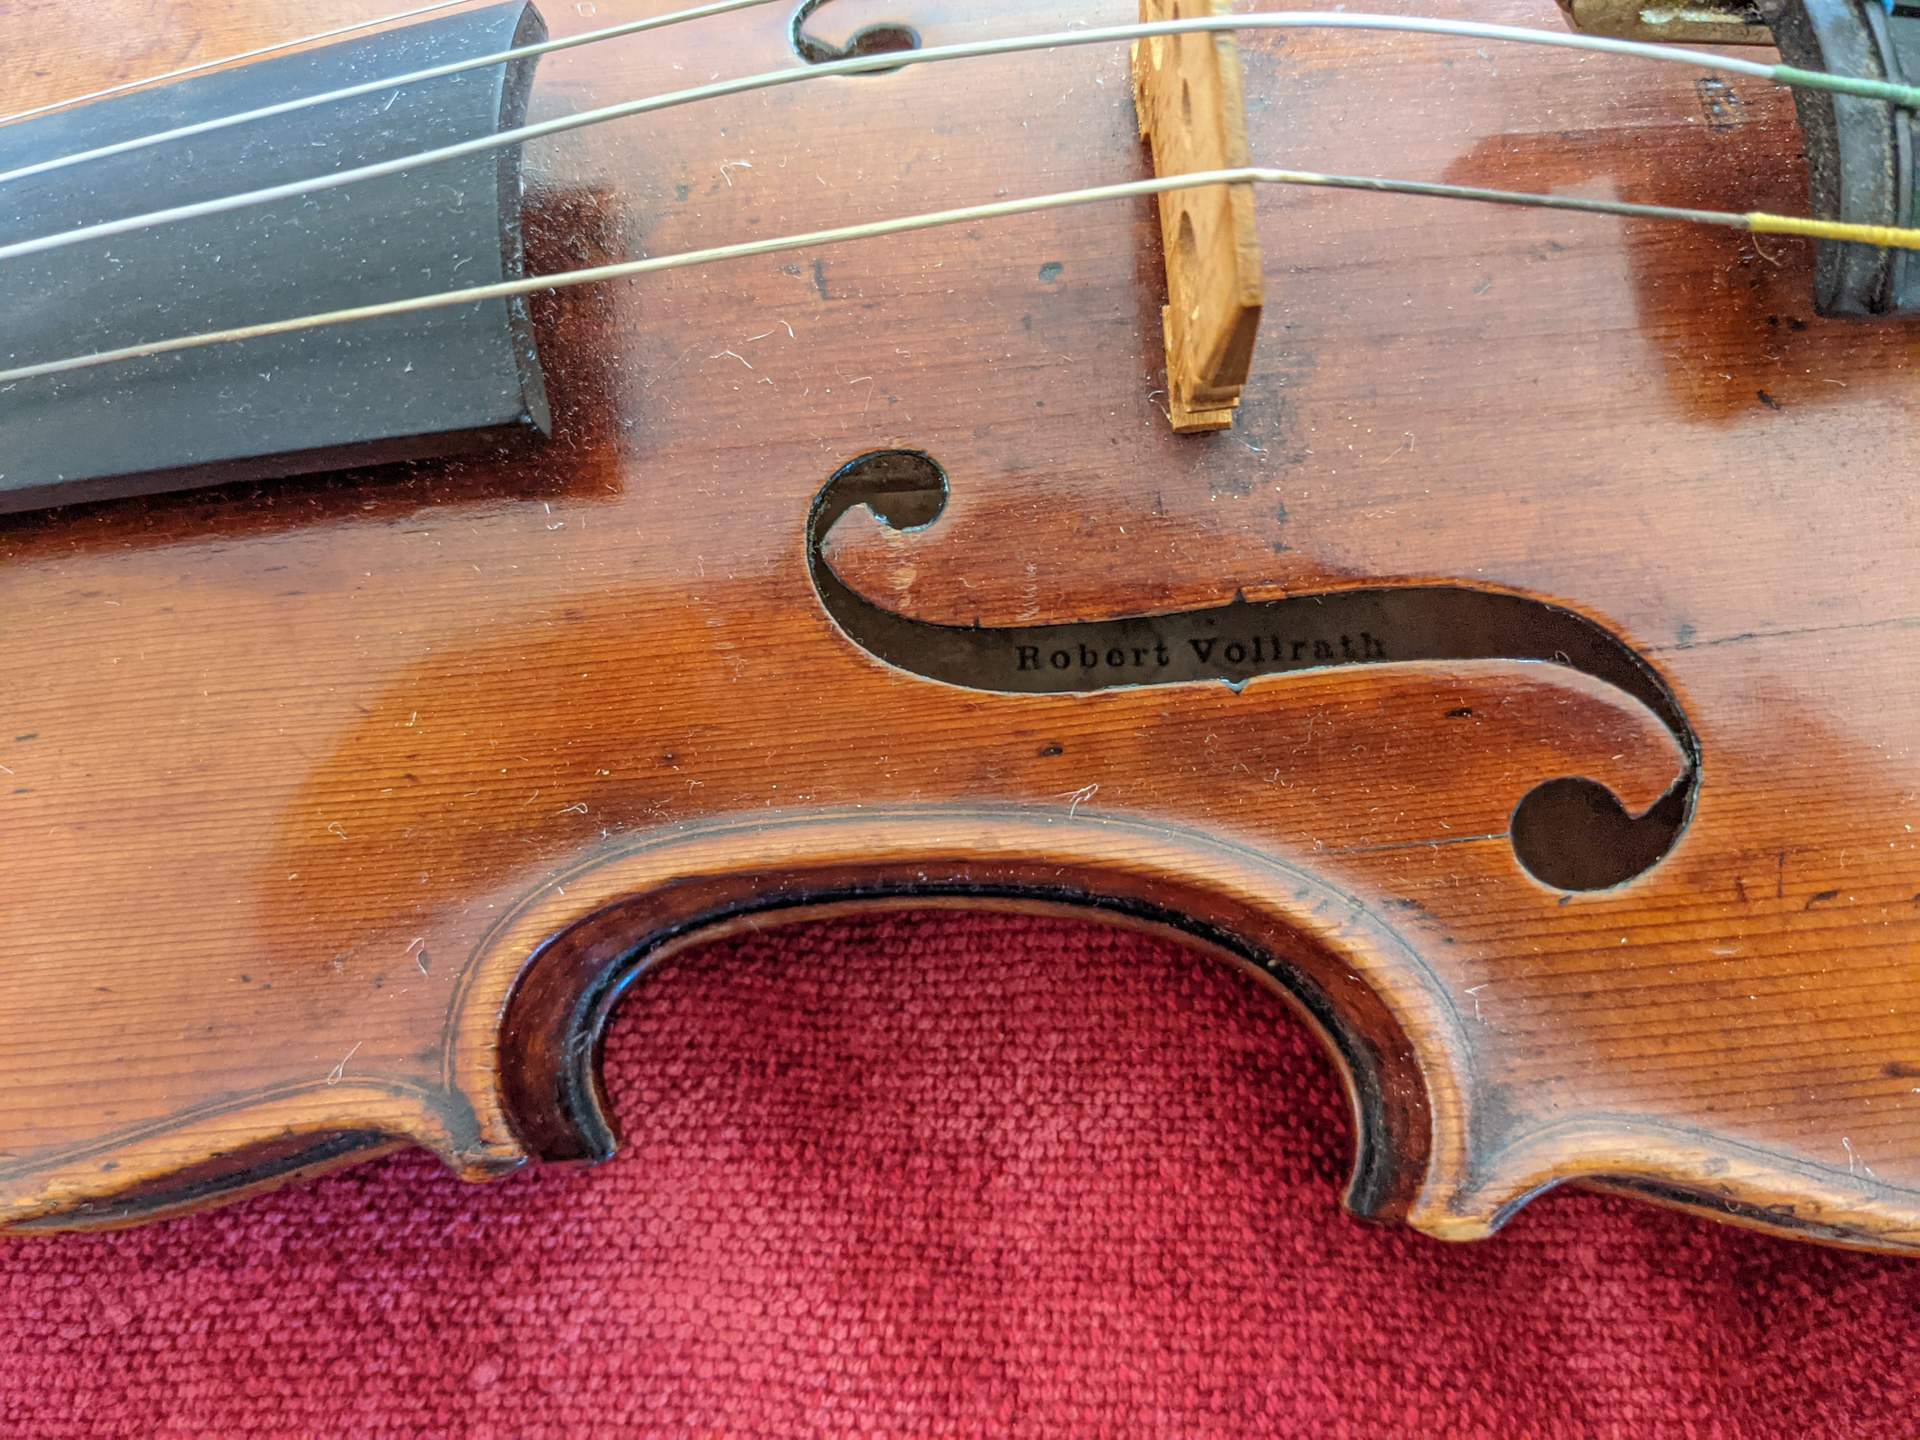 A violin made by Robert Vollrath of Austria in 1870.